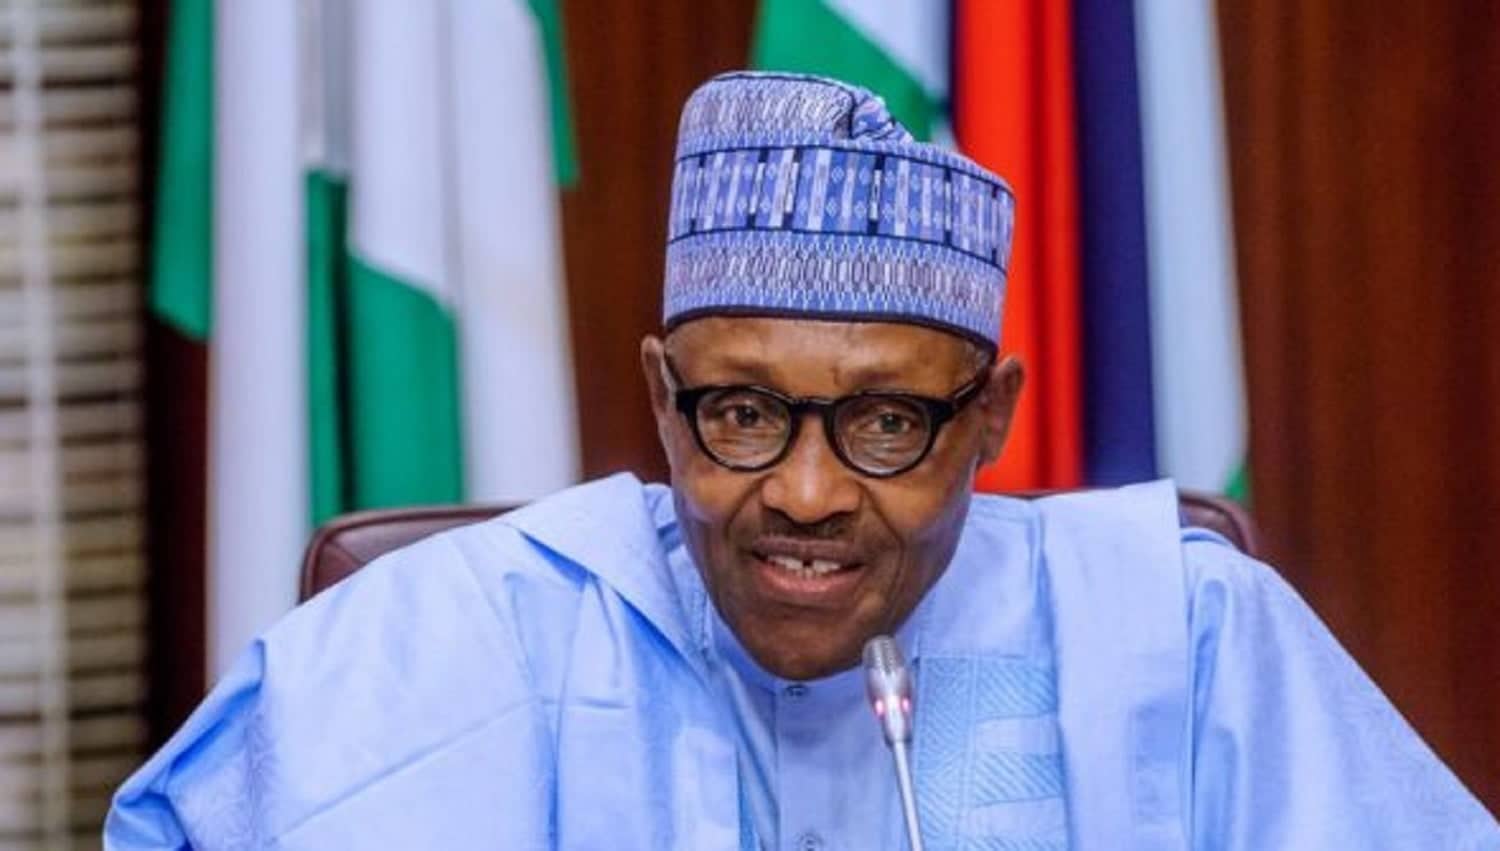 We’ll continue to empower Nigerian women, says President Buhari